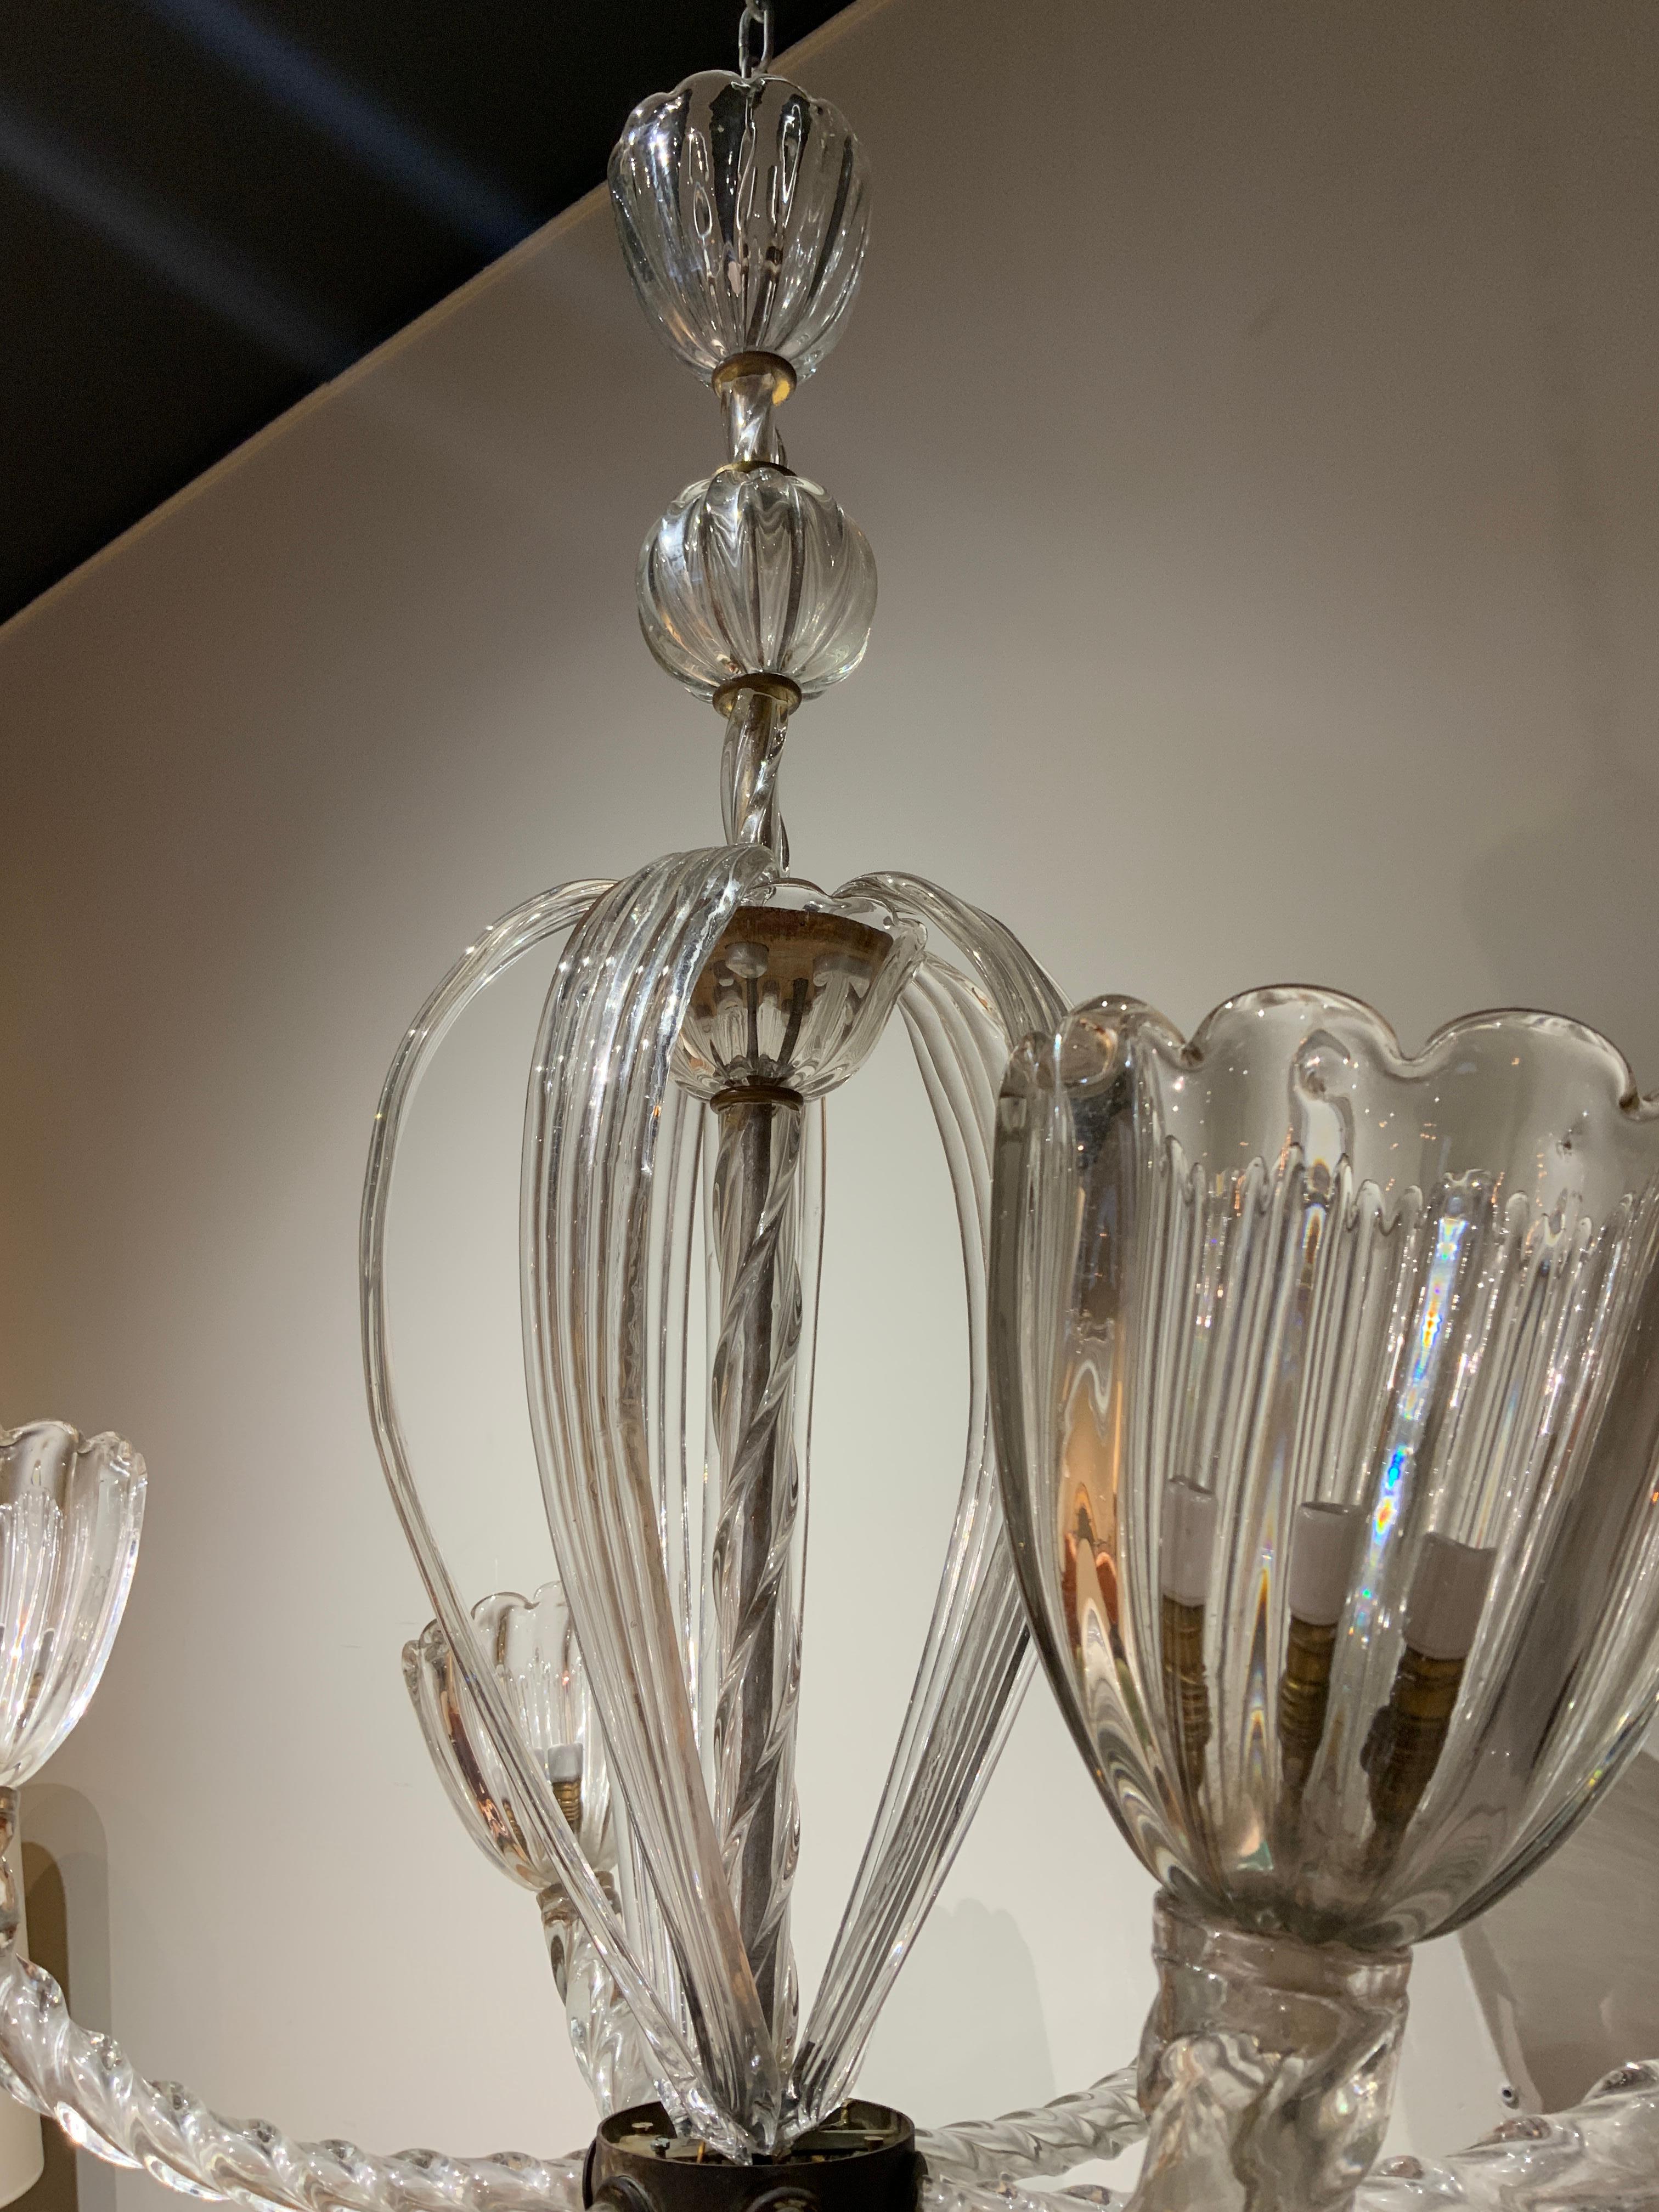 Elegant chandelier attributed to Archimede Seguso Murano Italy circa 1960
6 arms and brass details 
Impressive in person 